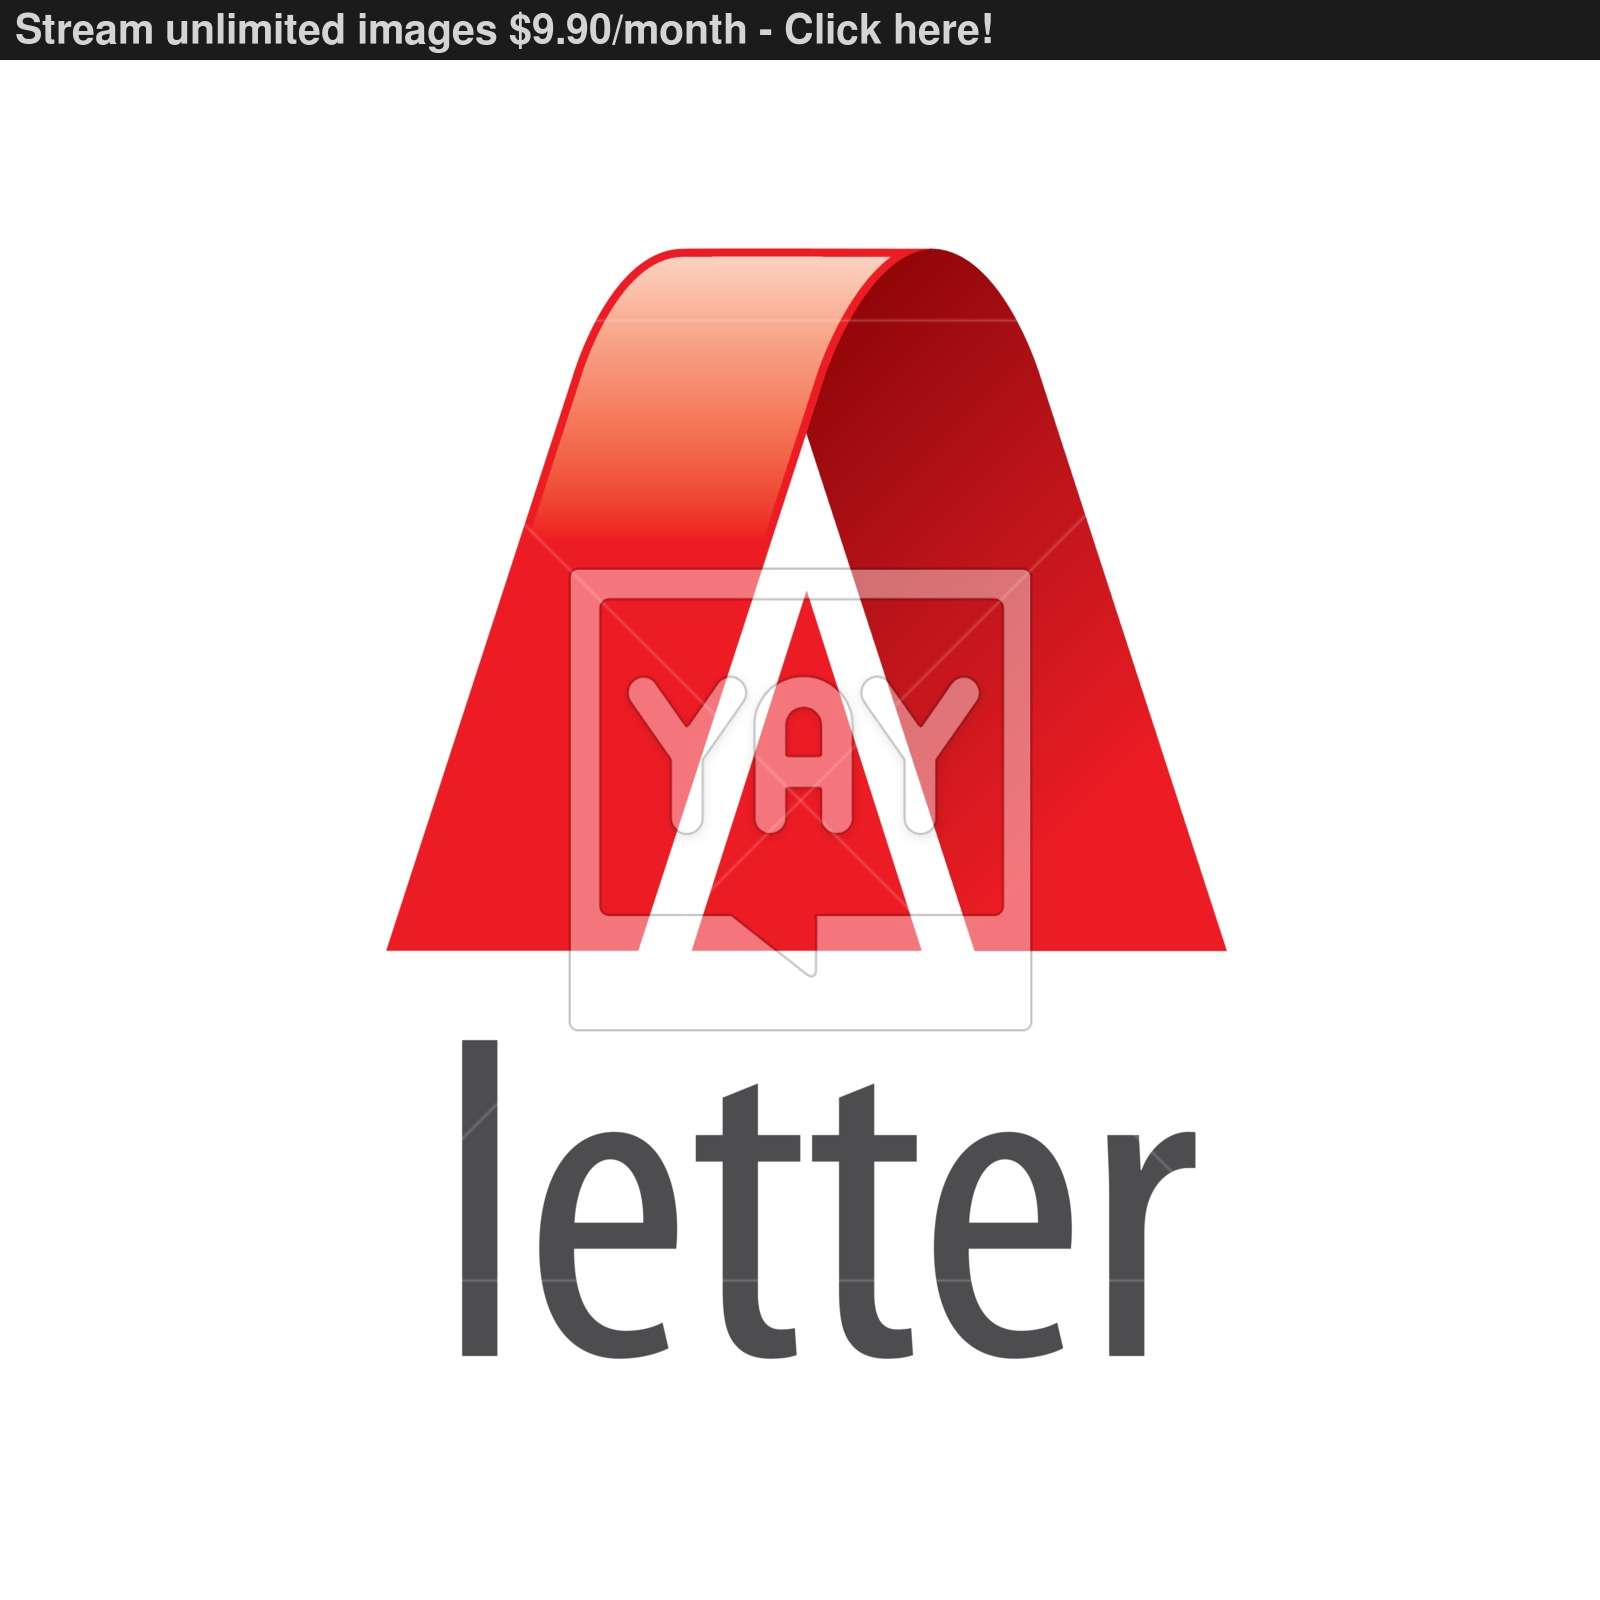 6 Red Letter Logo - Abstract vector logo red letter A vector | YayImages.com